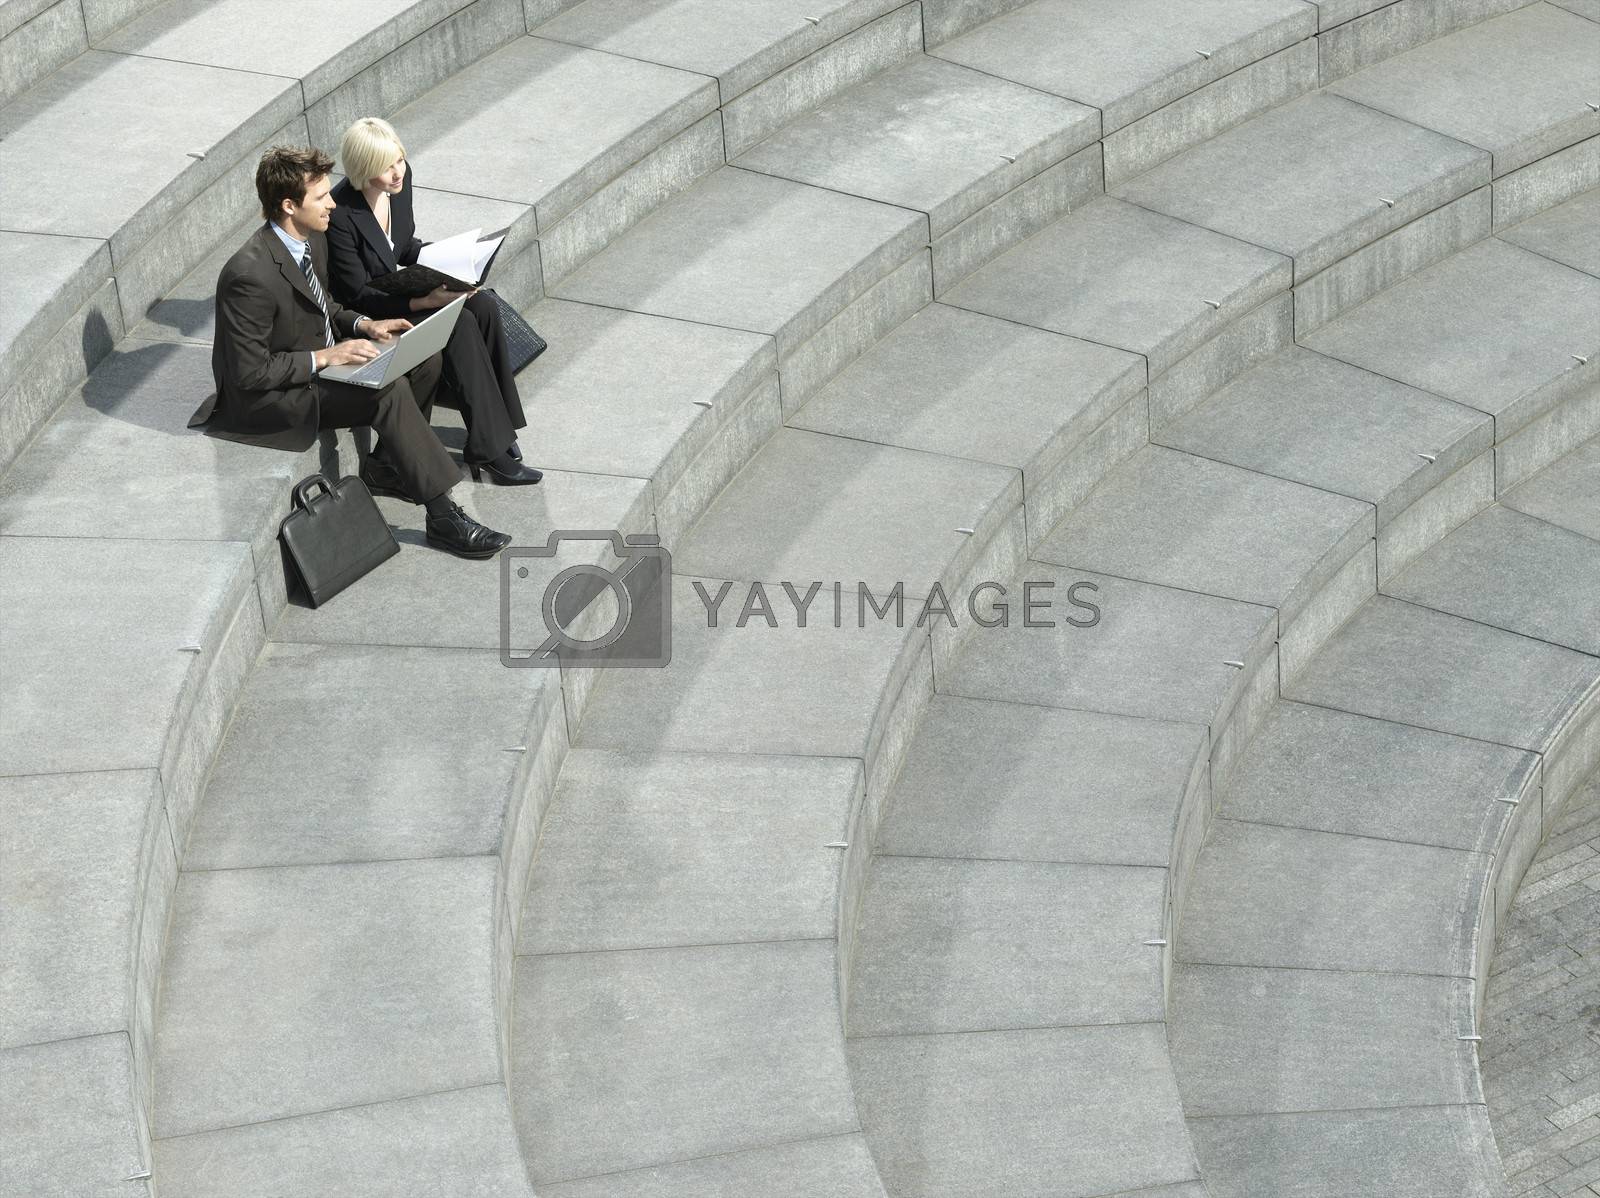 Royalty free image of Business man and woman sitting on spiral stairs using laptop elevated view by moodboard